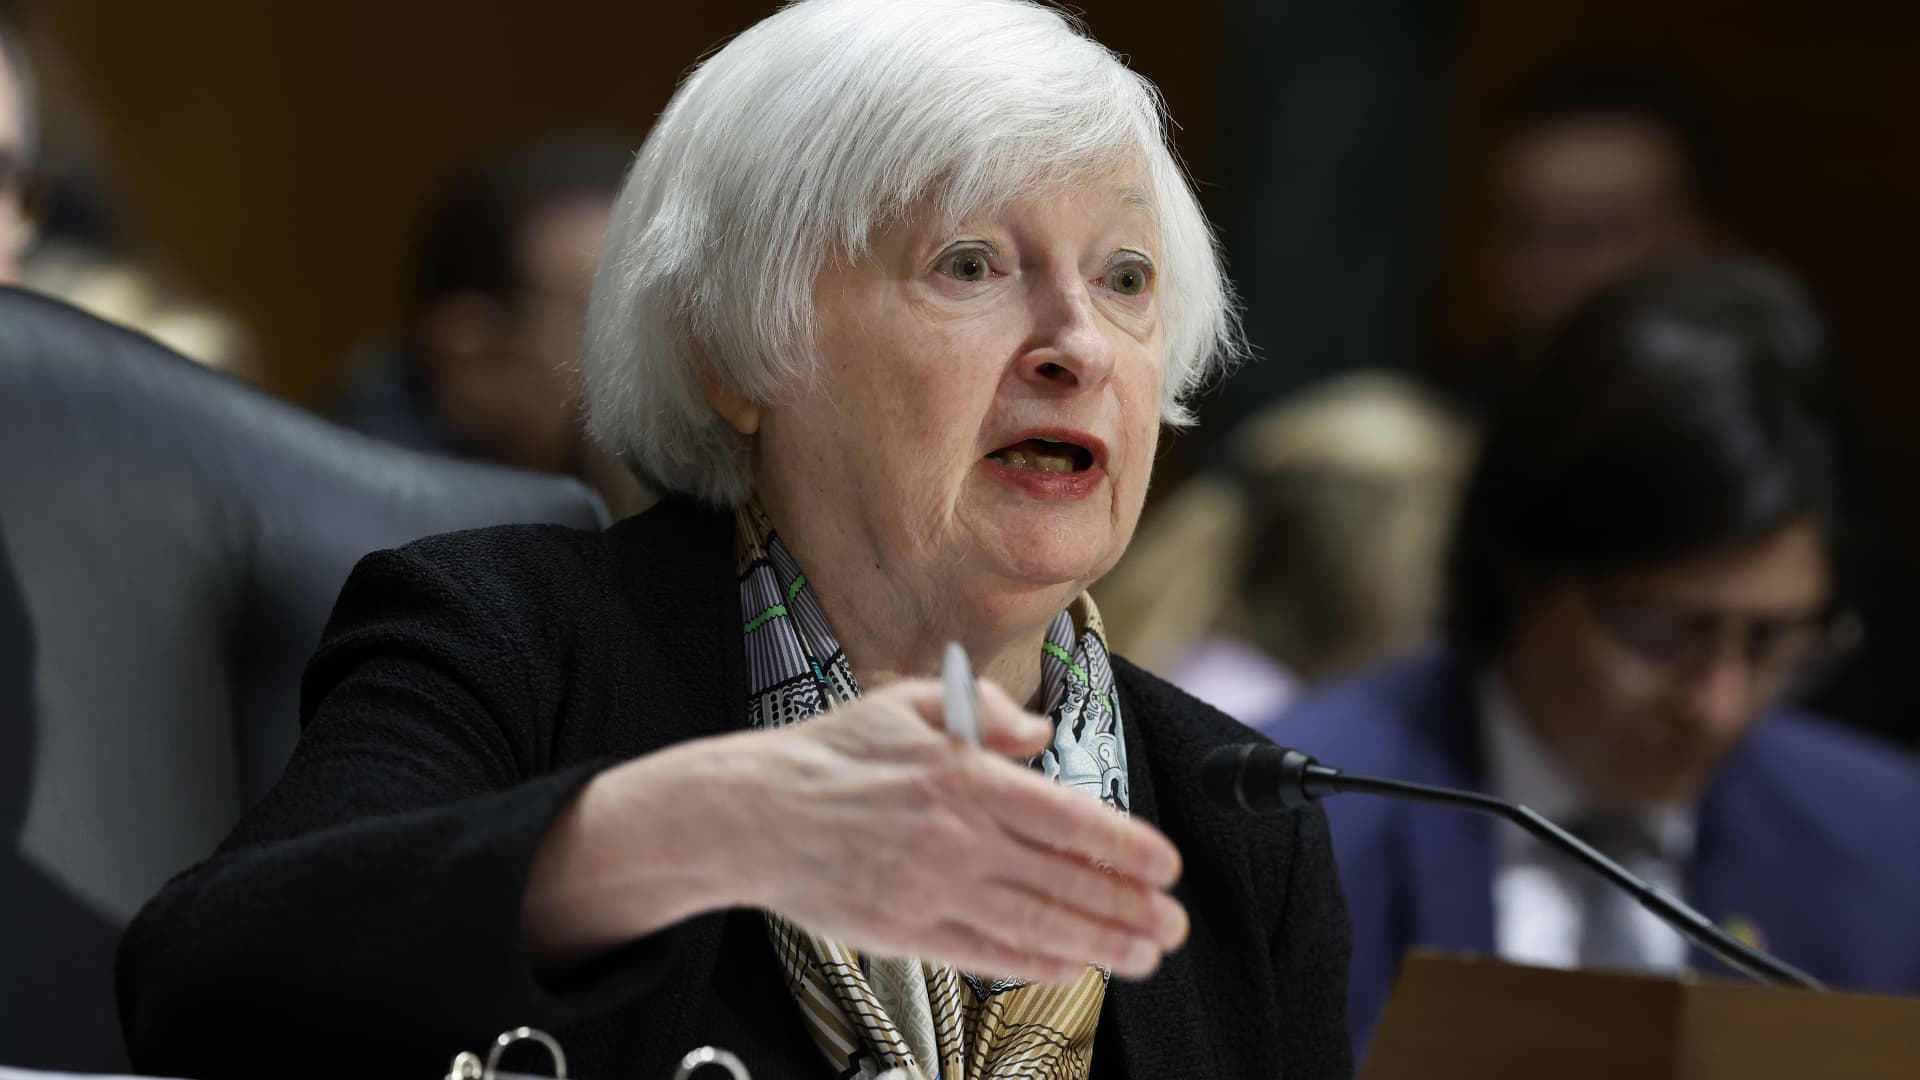 China would be among first paid under GOP debt limit plan, Treasury Secretary Yellen says